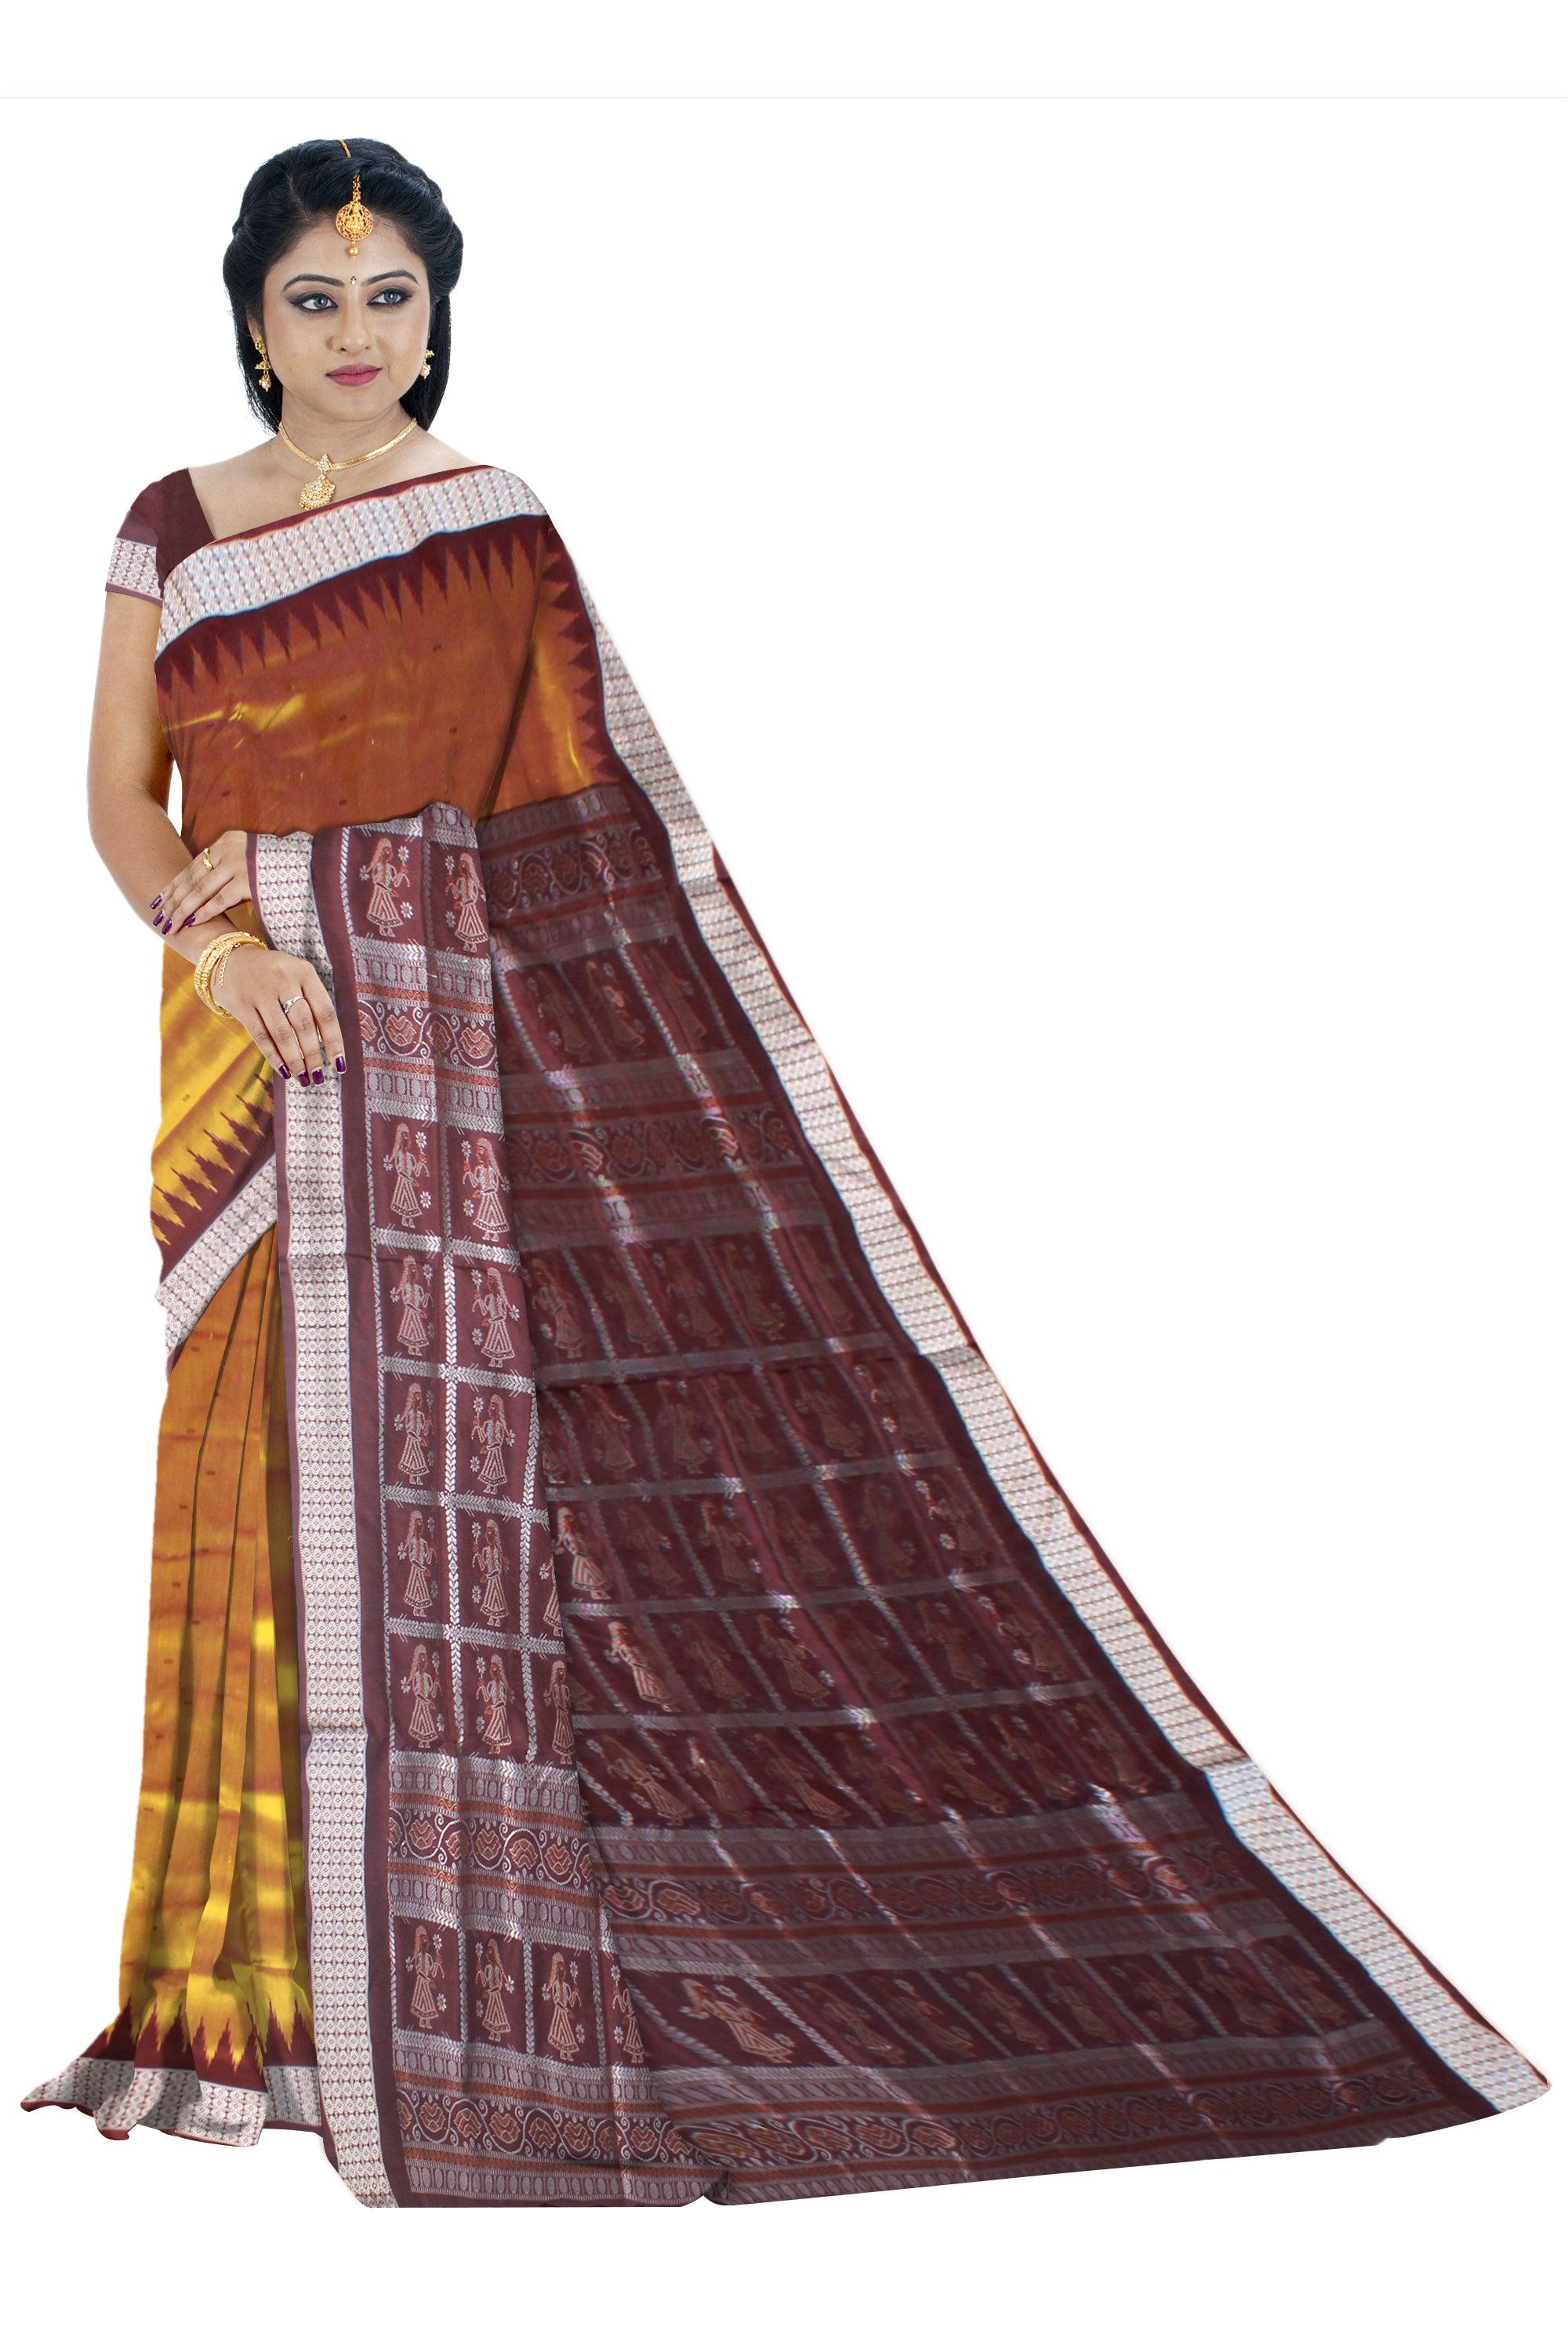 SMALL BOOTY PATTERN PATA SAREE IS YELLOW AND MAROON COLOR BASE, COMES WITH BLOUSE PIECE. - Koshali Arts & Crafts Enterprise